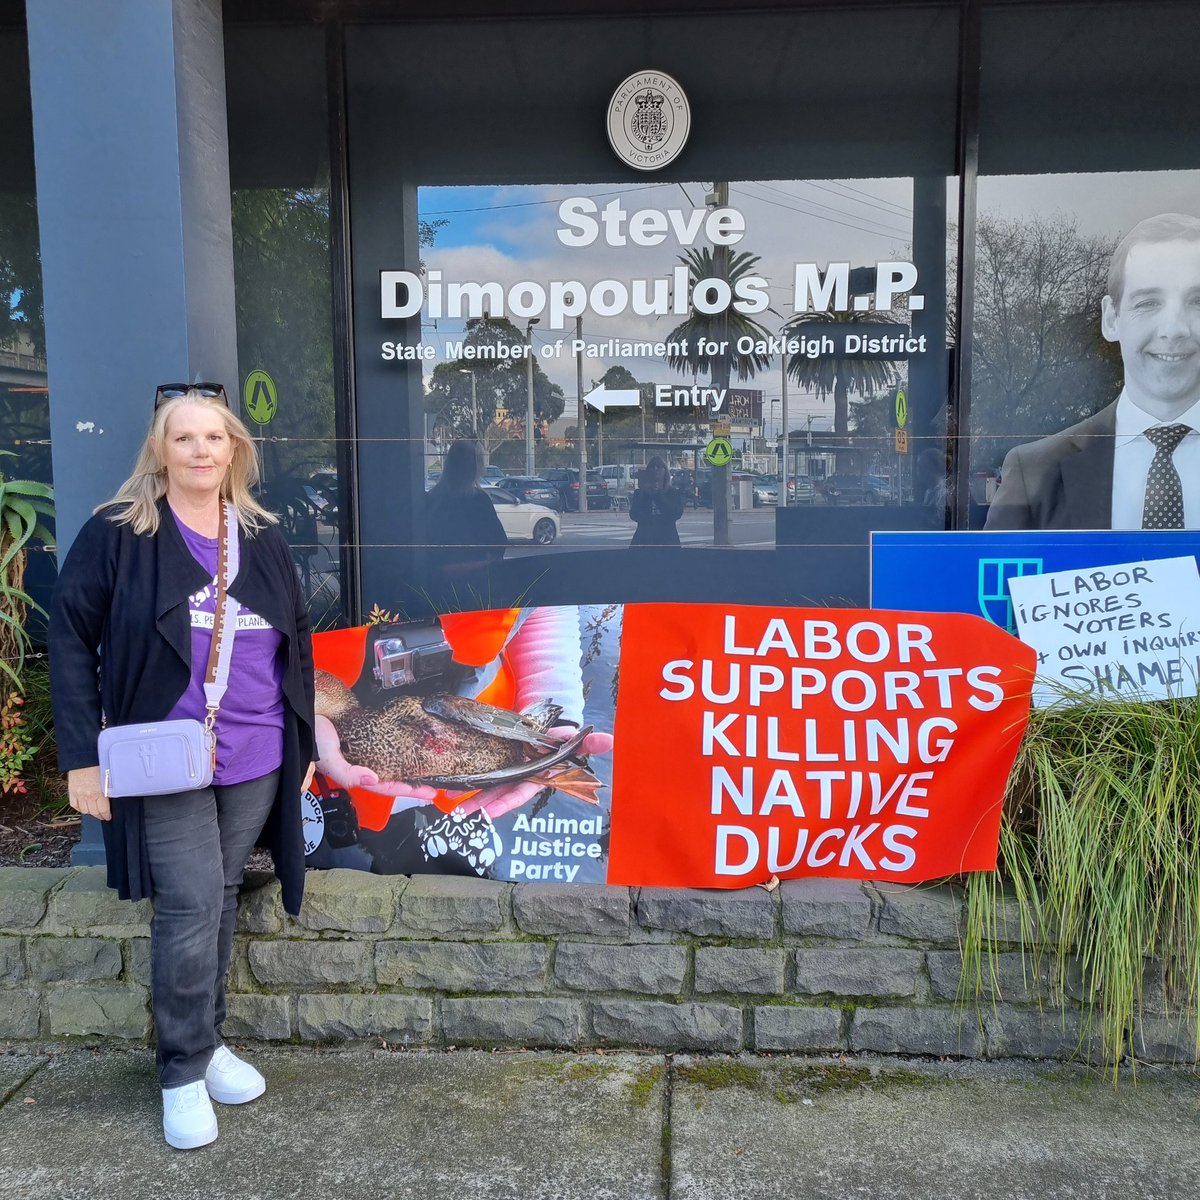 Yesterday we held a series of protests outside @VictorianLabor MP Offices.
There is so much support to #BanDuckShooting
Labor, you got this wrong.  
At @Steve_Dimo office, we had people telling us this @JacintaAllanMP captain's call will change their vote.